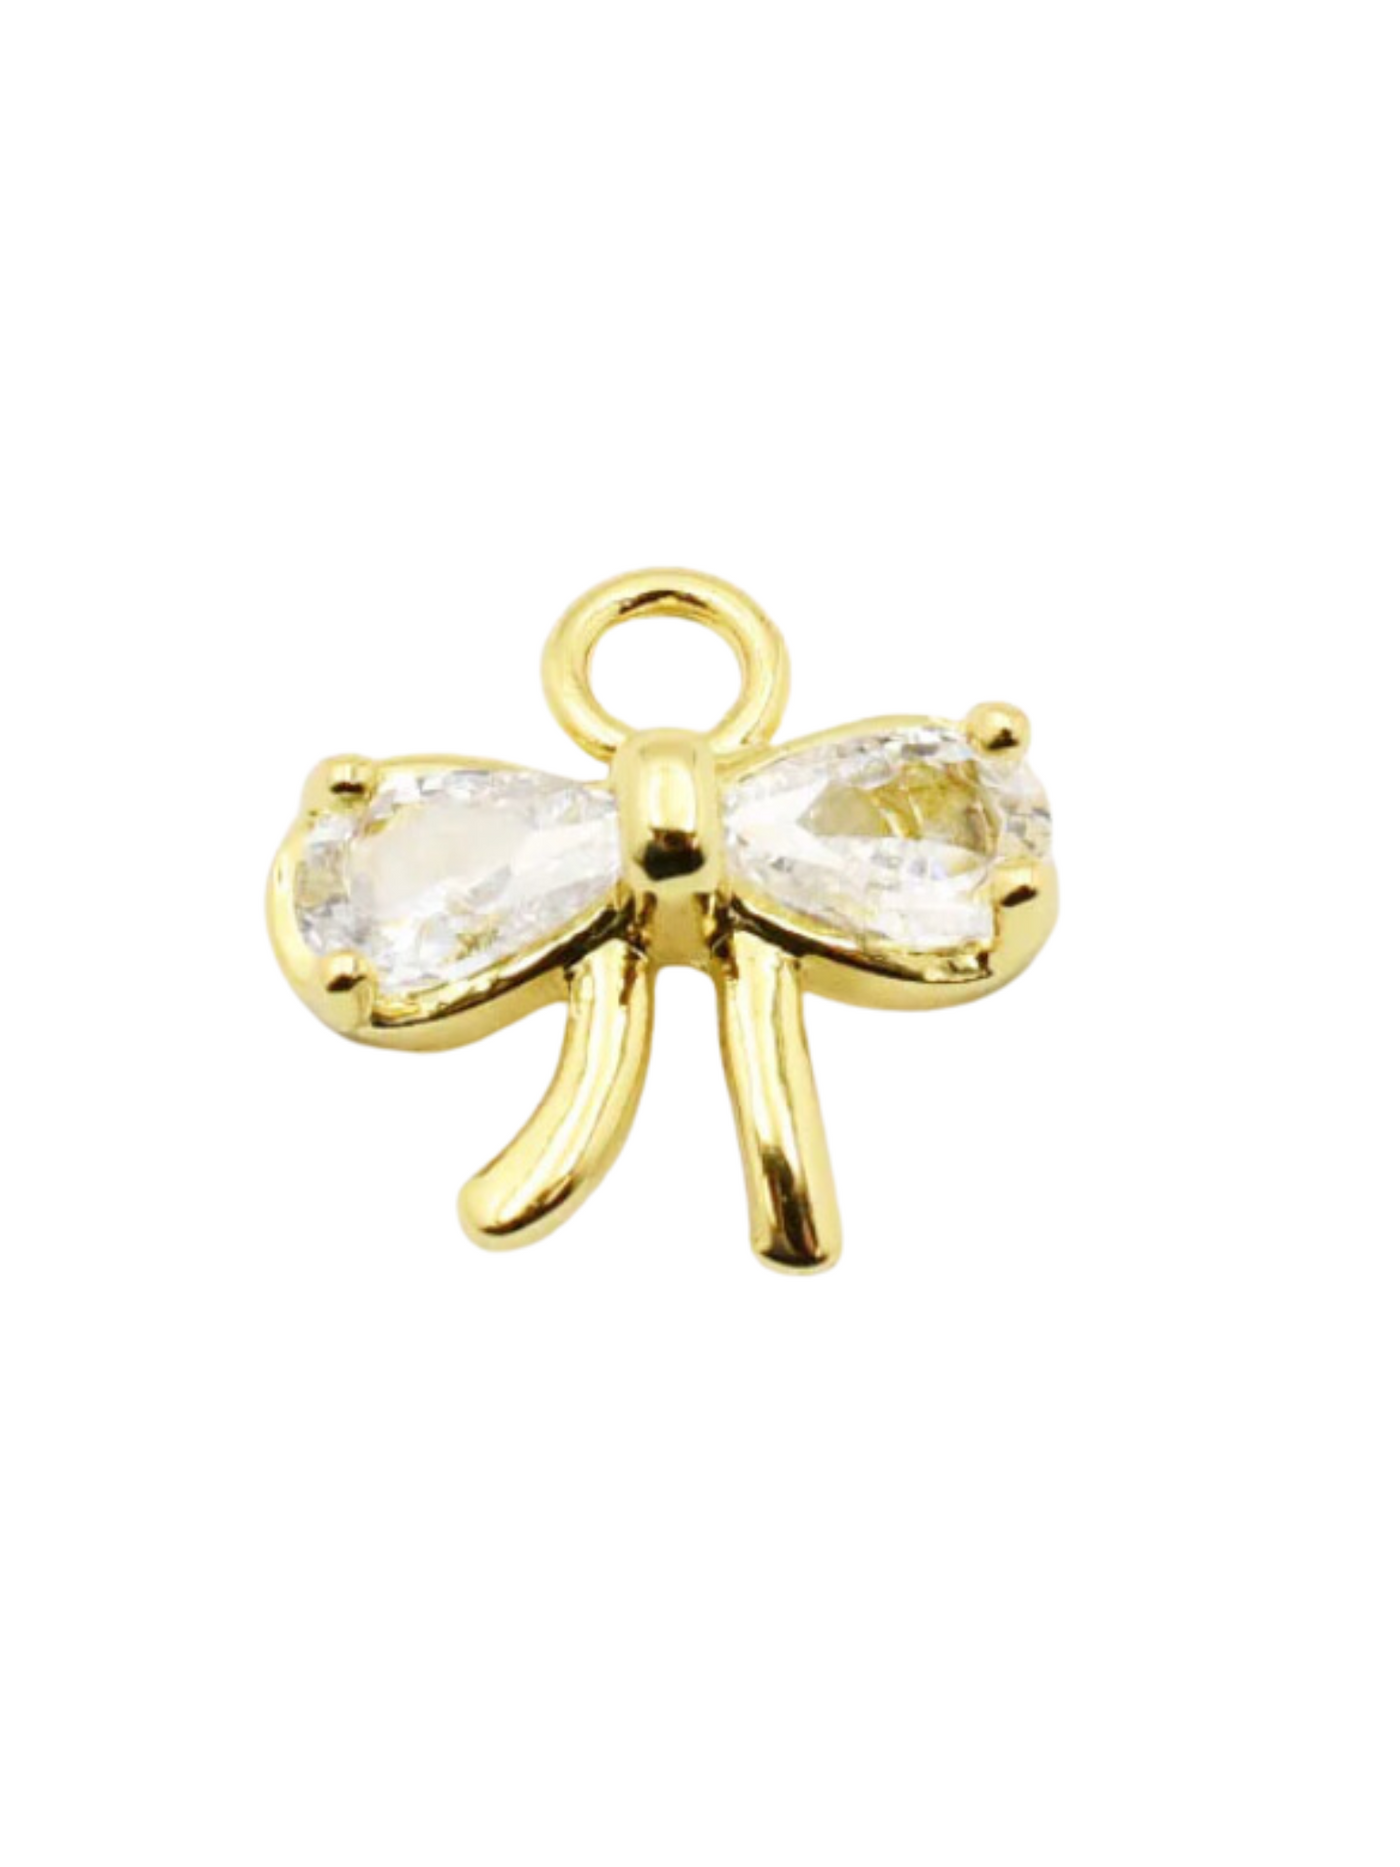 Small Gold and Rhinestone Bow Charm